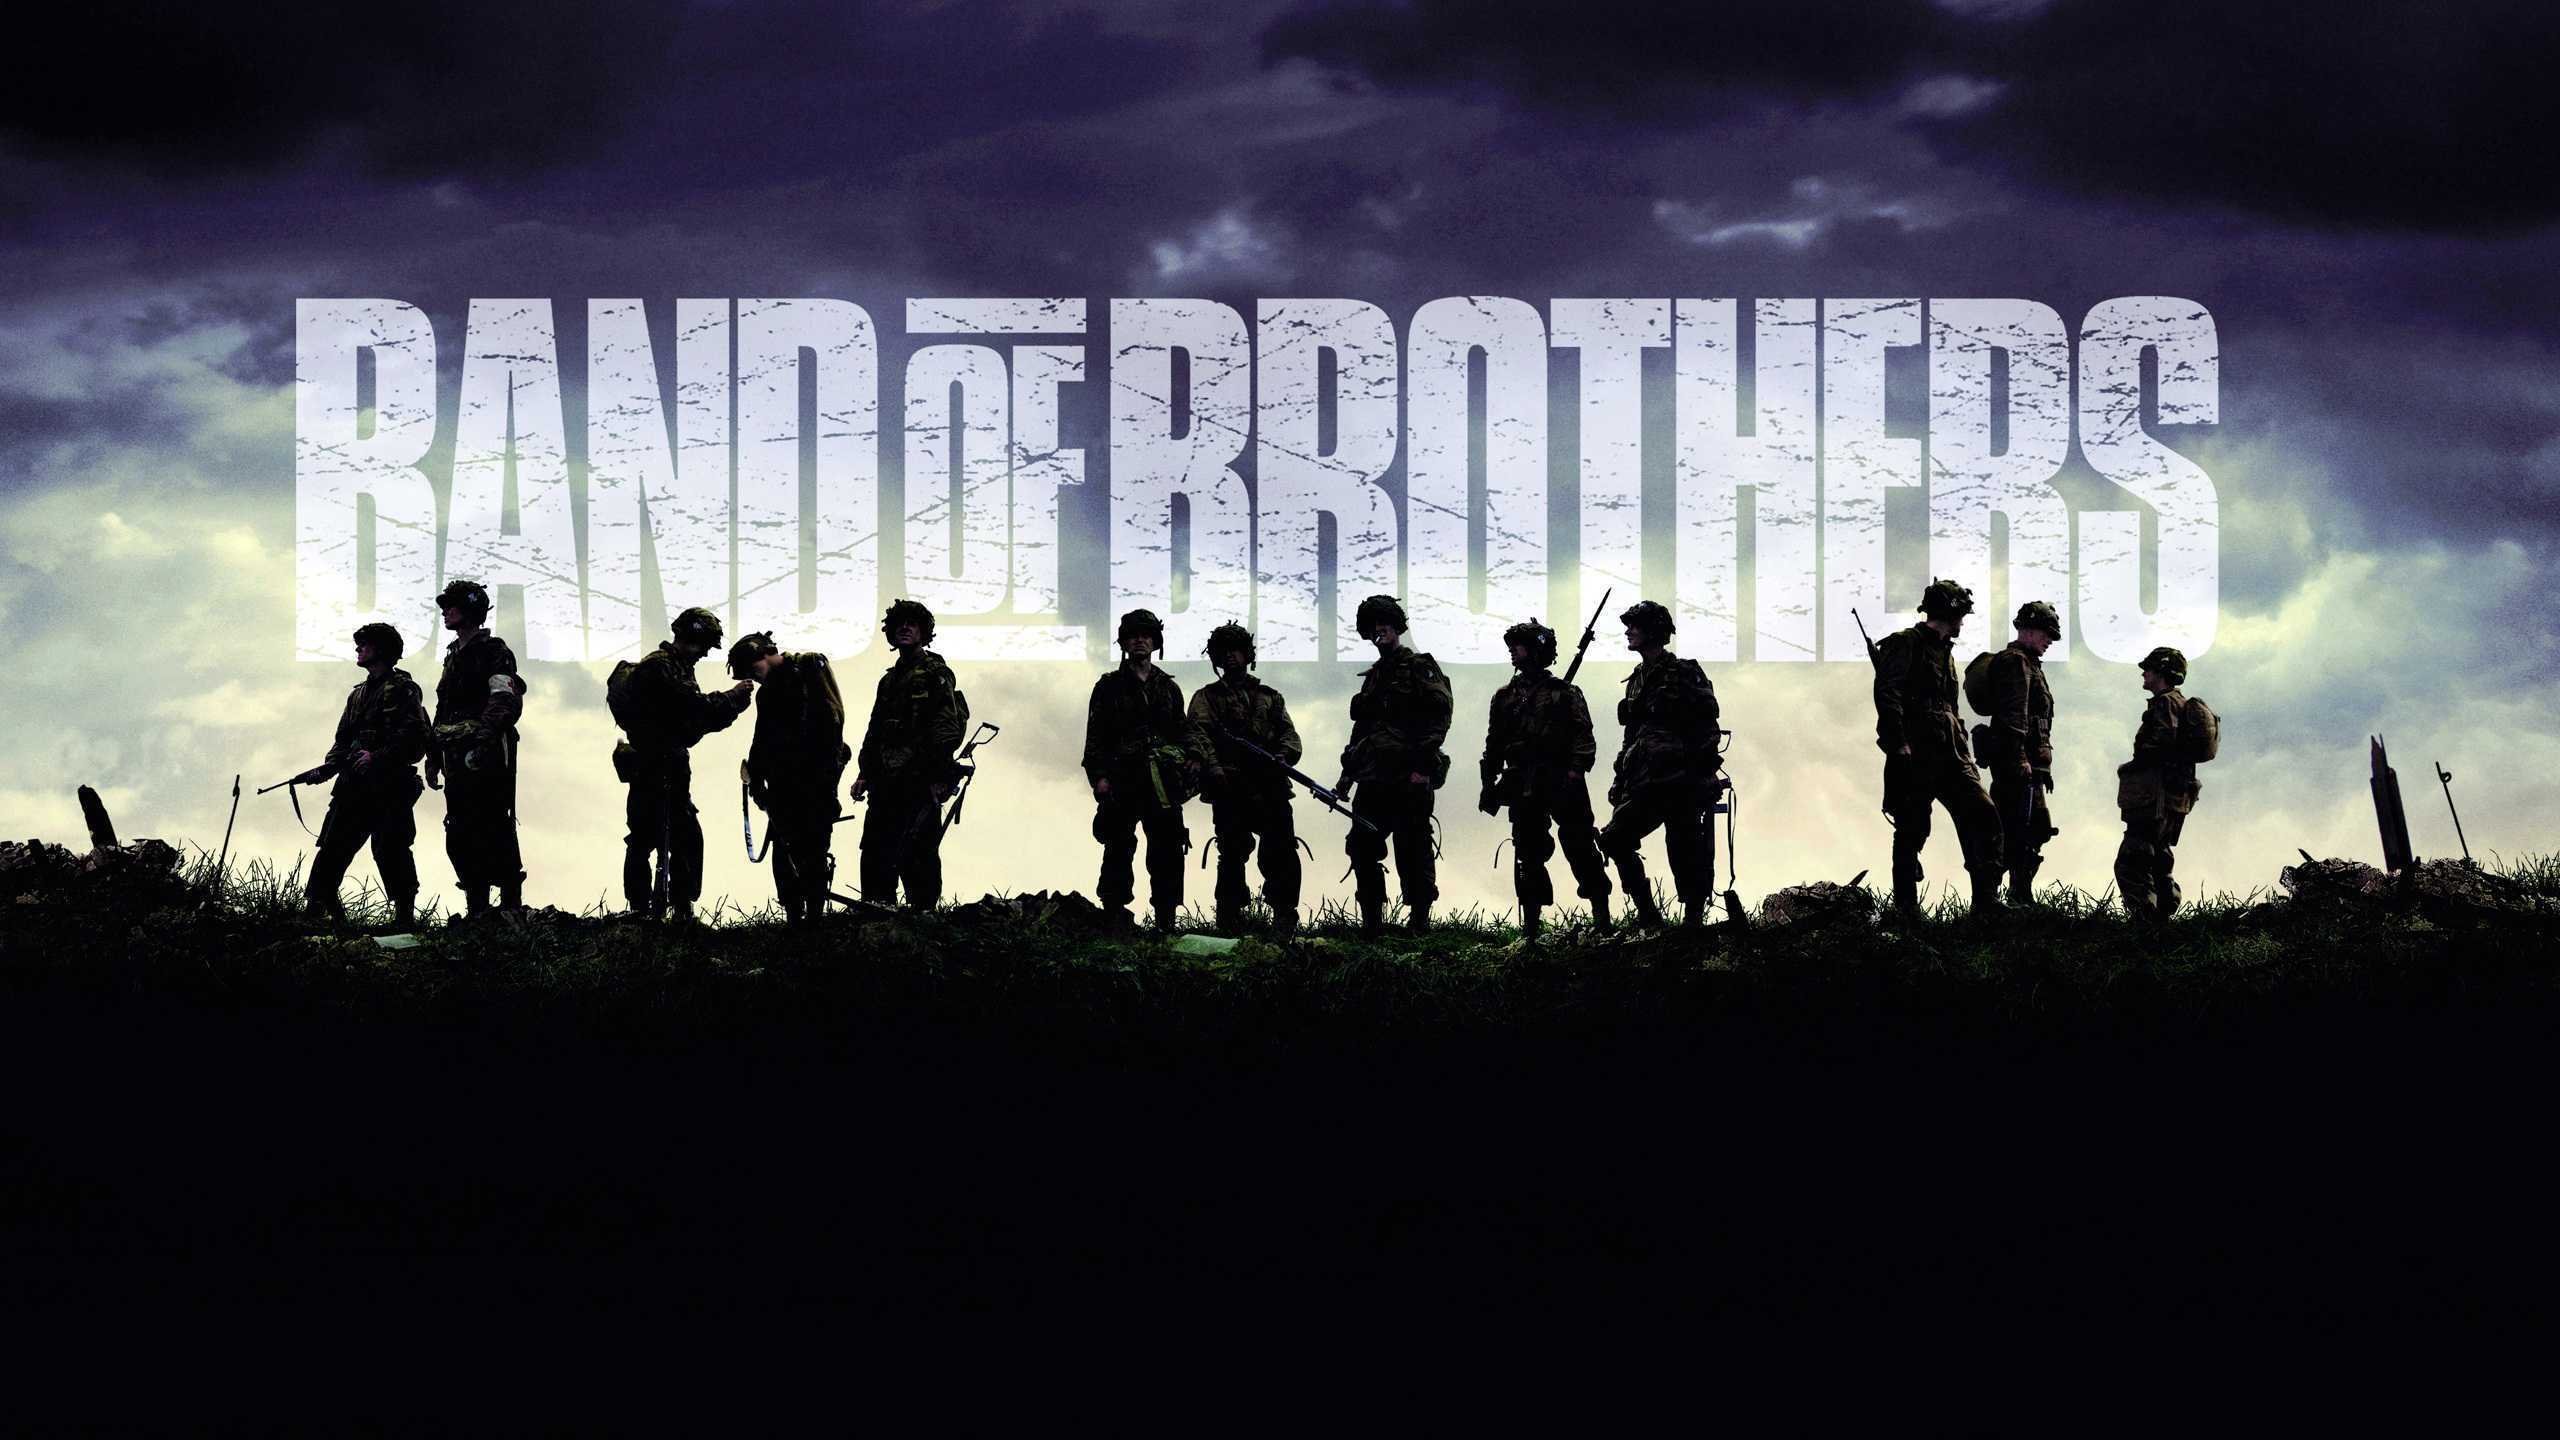 band, Of, Brothers, Serie, Tv Wallpaper